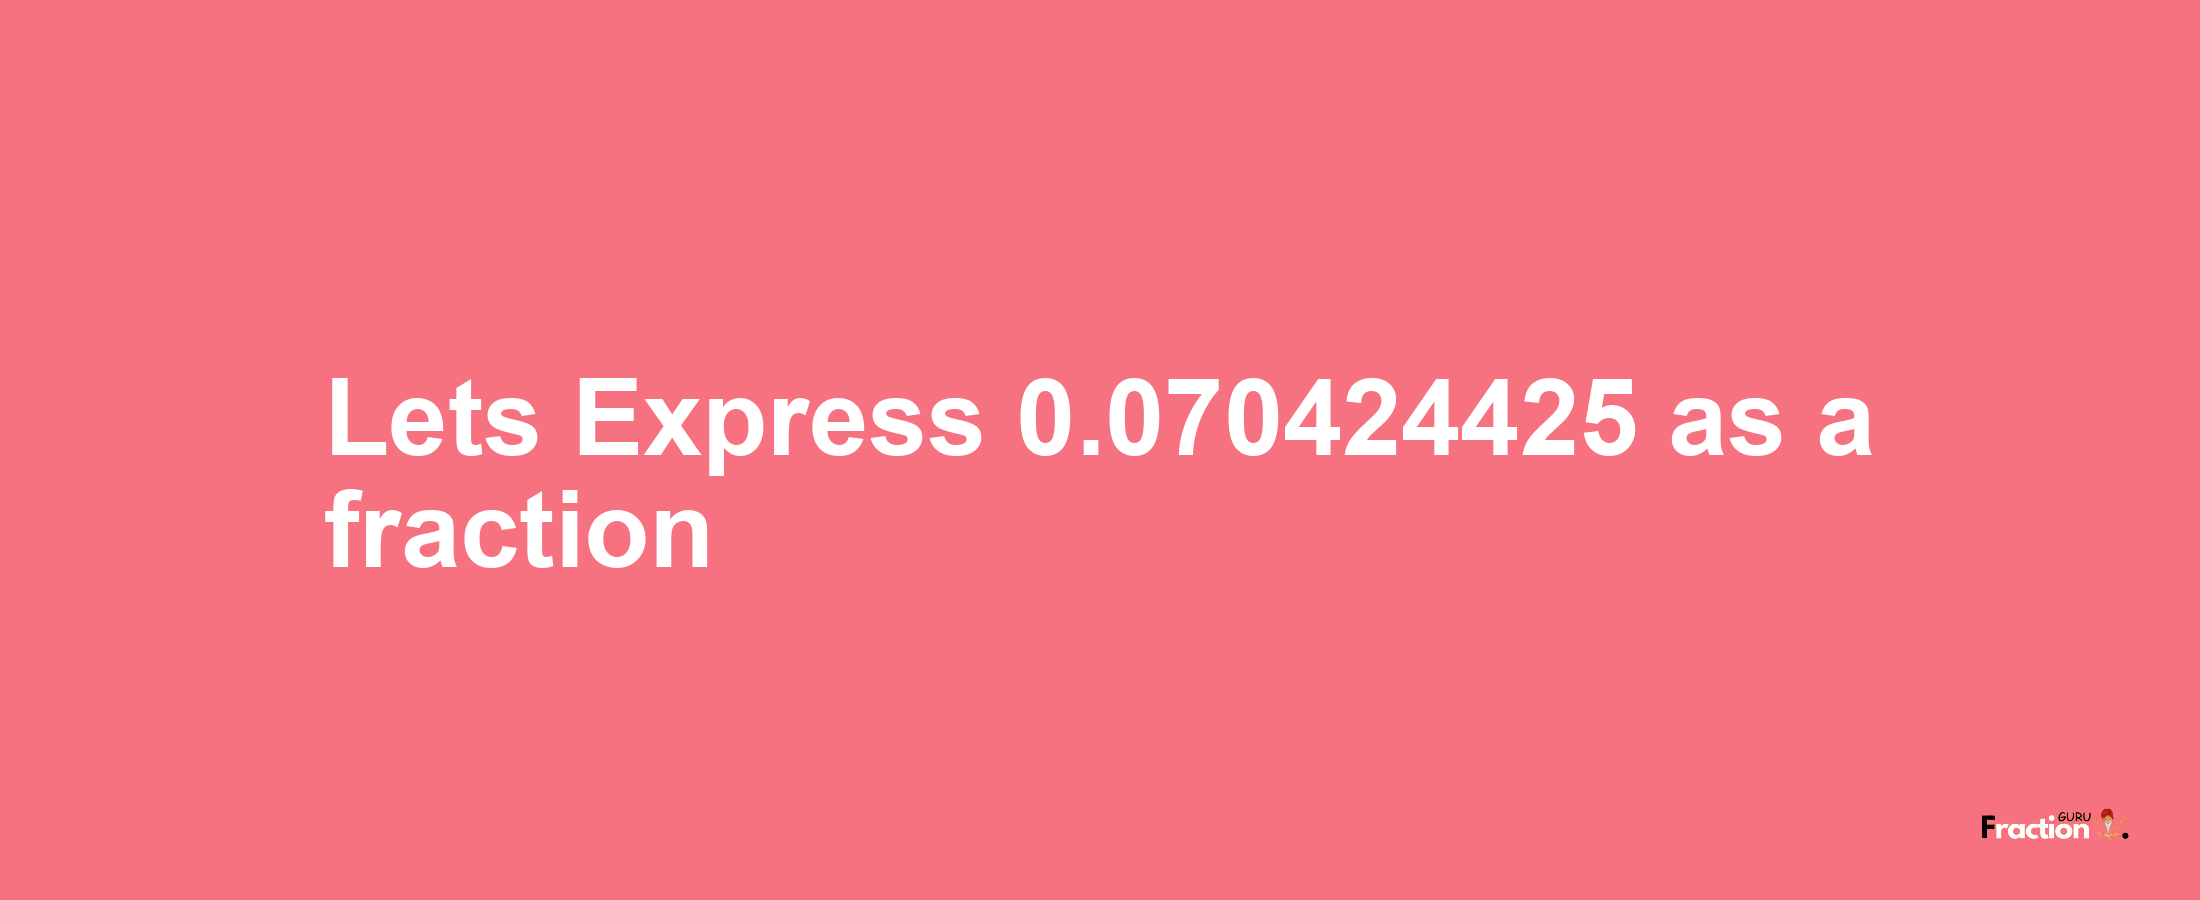 Lets Express 0.070424425 as afraction